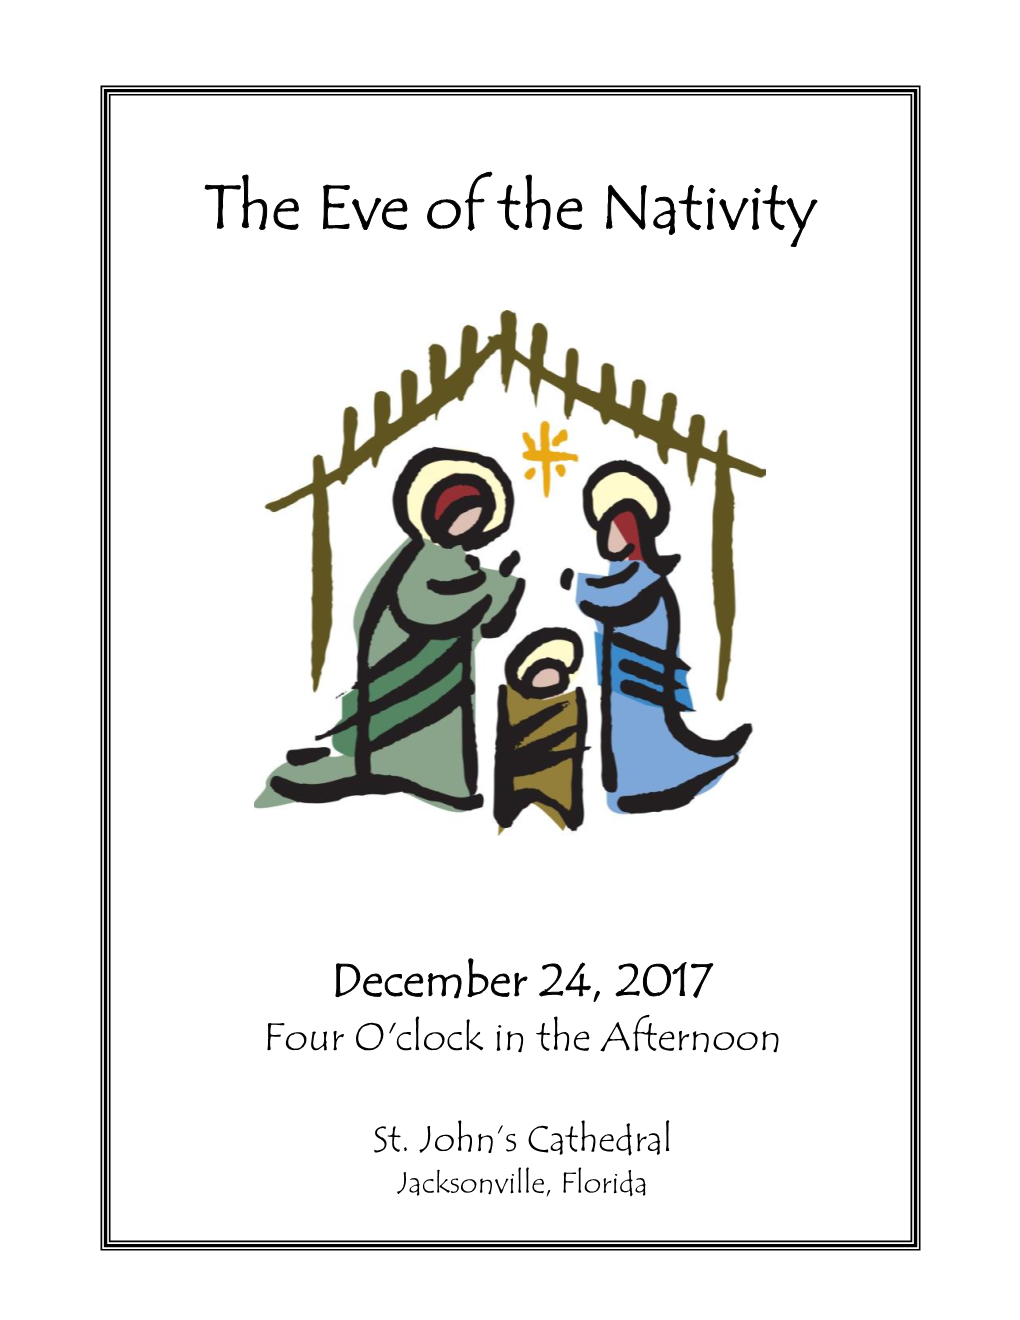 The Eve of the Nativity